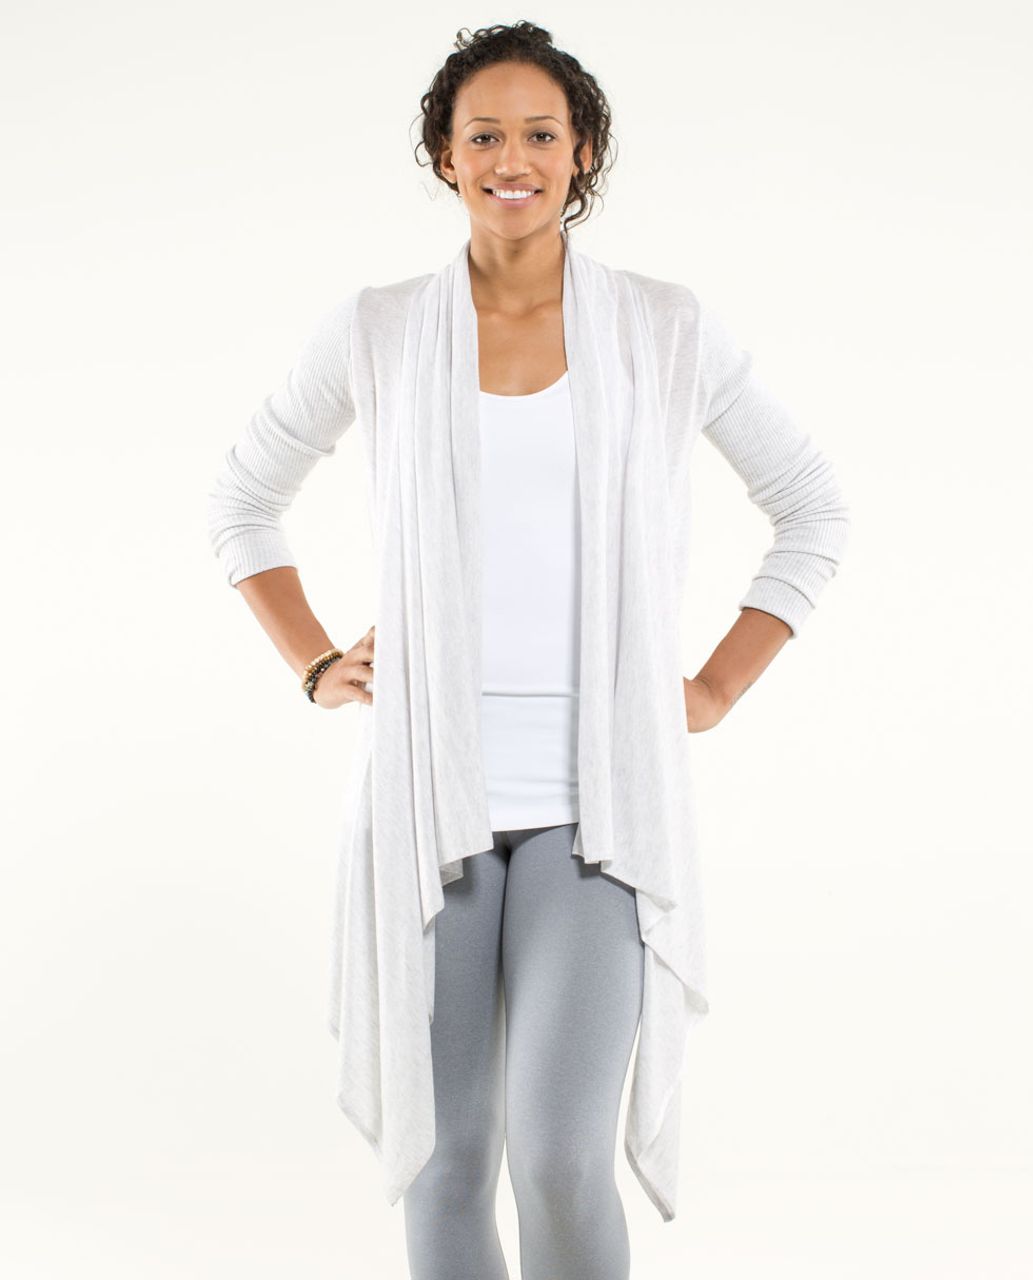 Lululemon Universal Wrap - Heathered White (First Release)